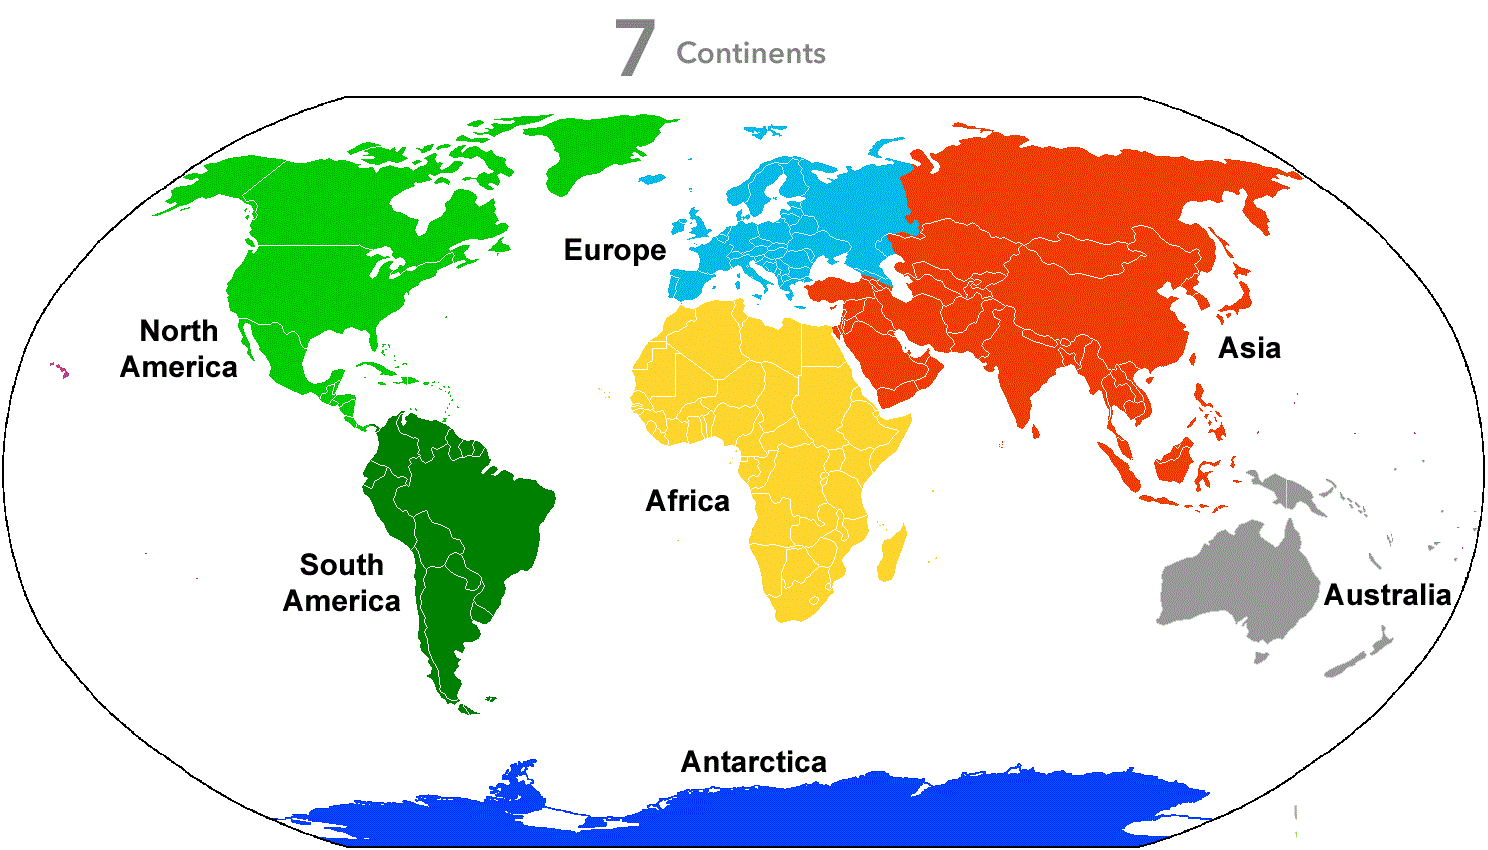 7 Continents Map,Continents Of The World